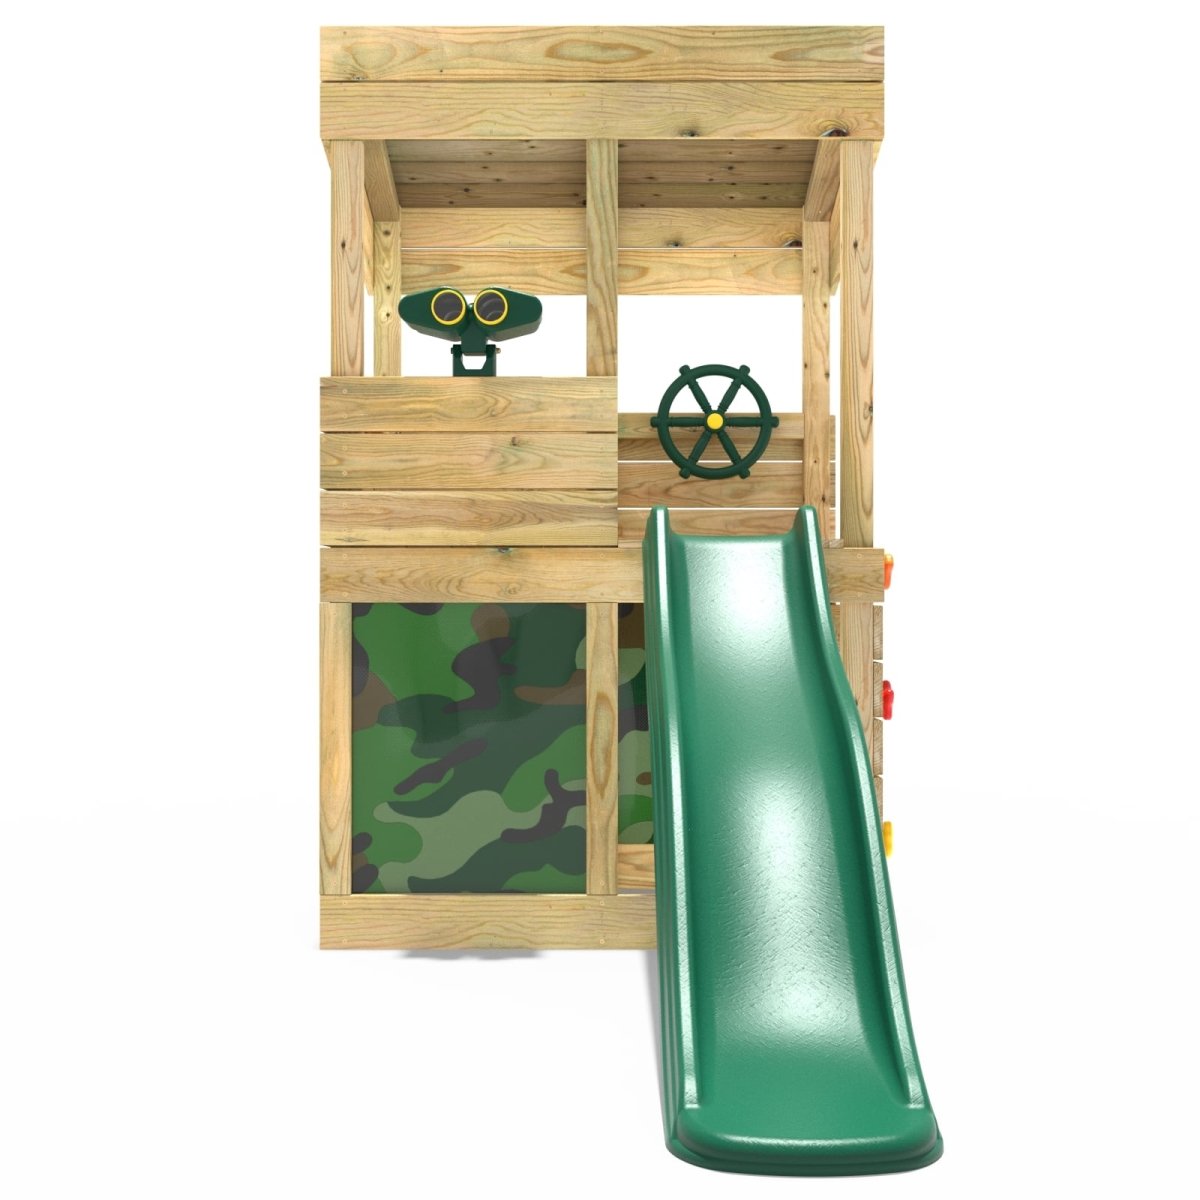 Rebo Wooden Lookout Tower Playhouse with 6ft Slide - Lookout with Den & Adventure Camouflage